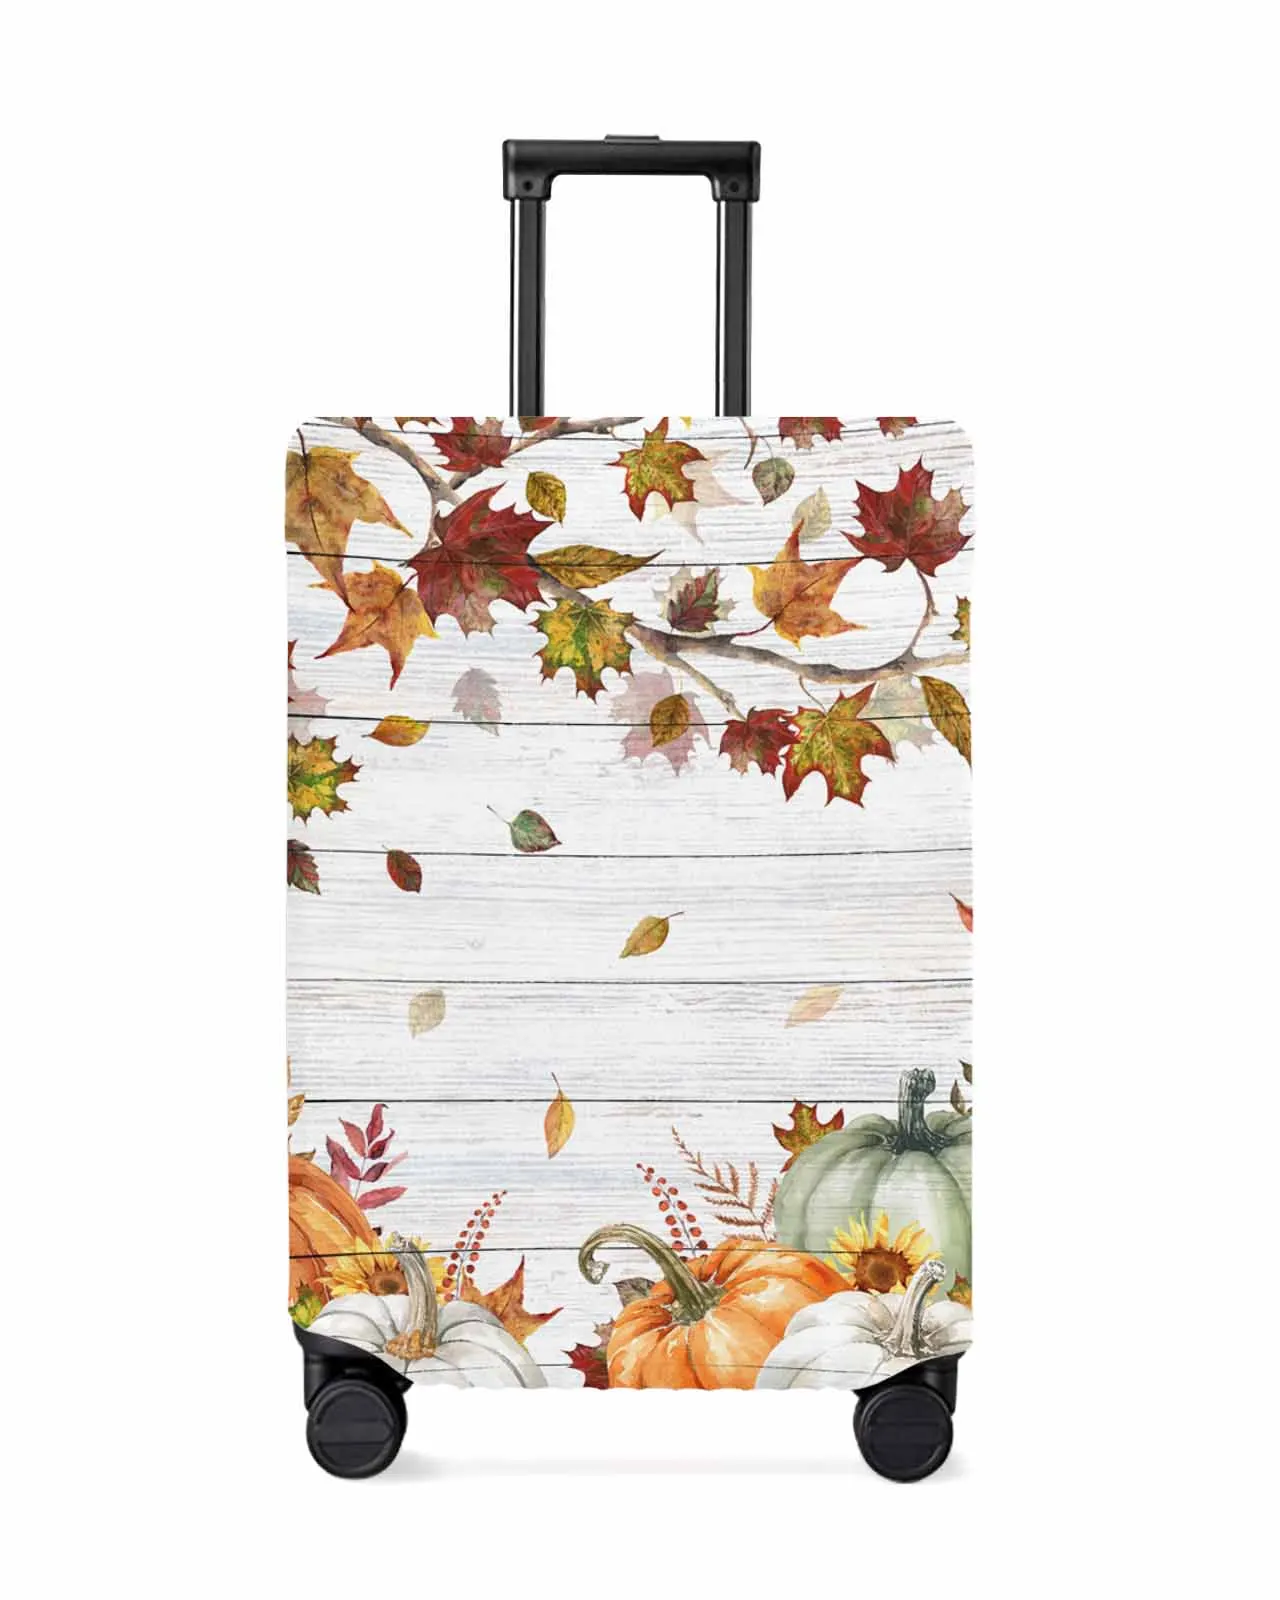 

Thanksgiving Leaves Autumn Pumpkin Wood Grain Luggage Cover Elastic Baggage Cover For 18-32 Inch Suitcase Case Dust Cover